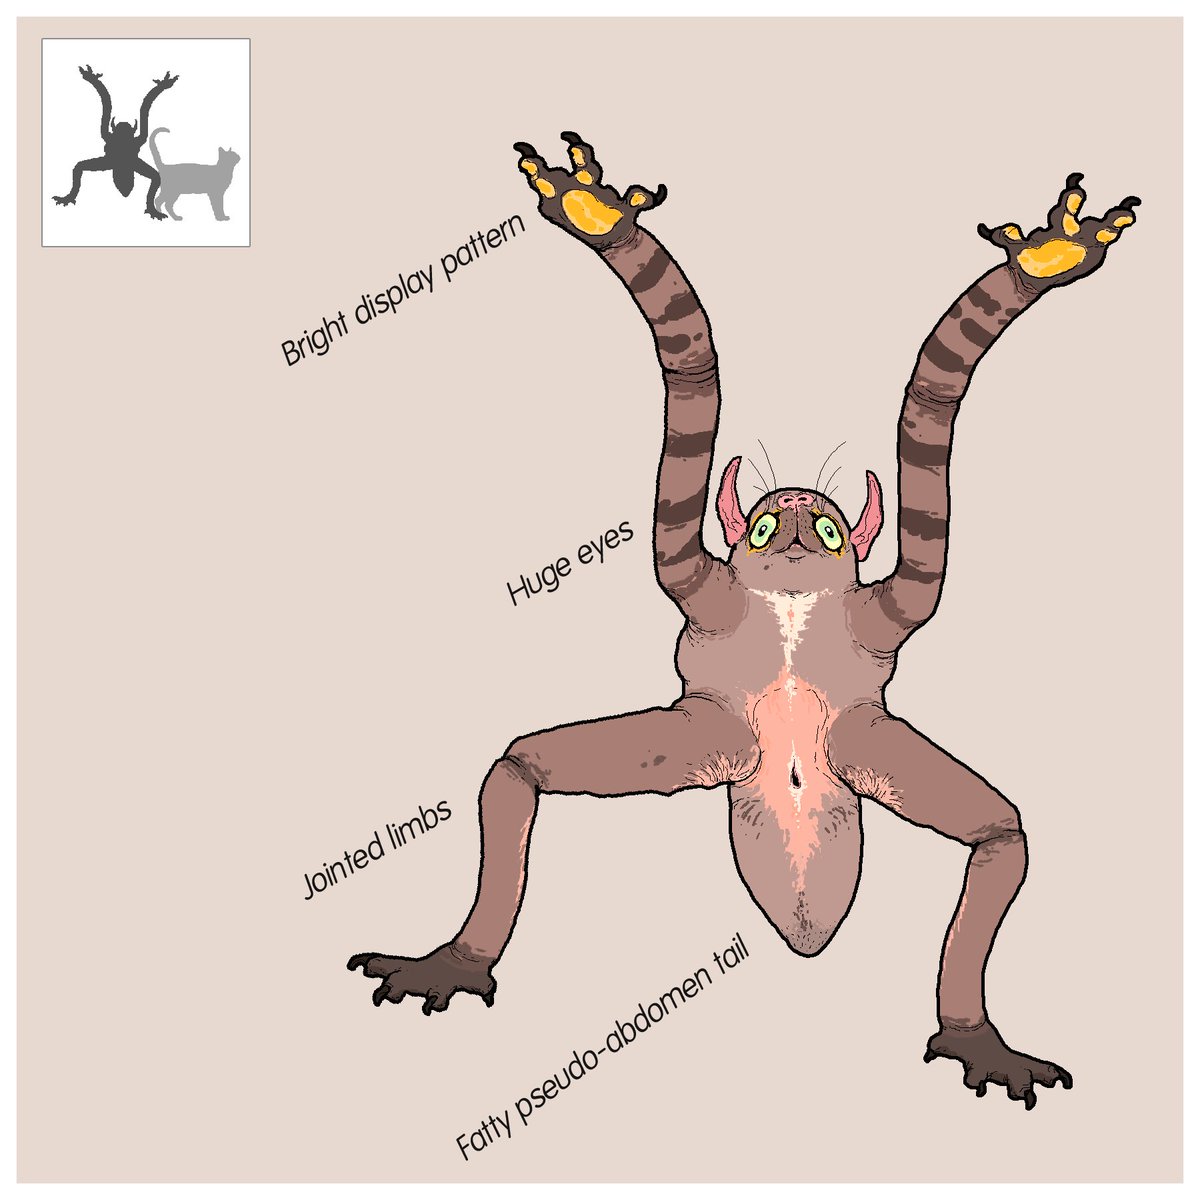 A far-future arboreal mammal, belonging to a clade with highly derived, superficially spider-like physiology. 

Males flash their brightly colored palms at females, vying for their attention with a lively mating dance.

#speculativeevolution